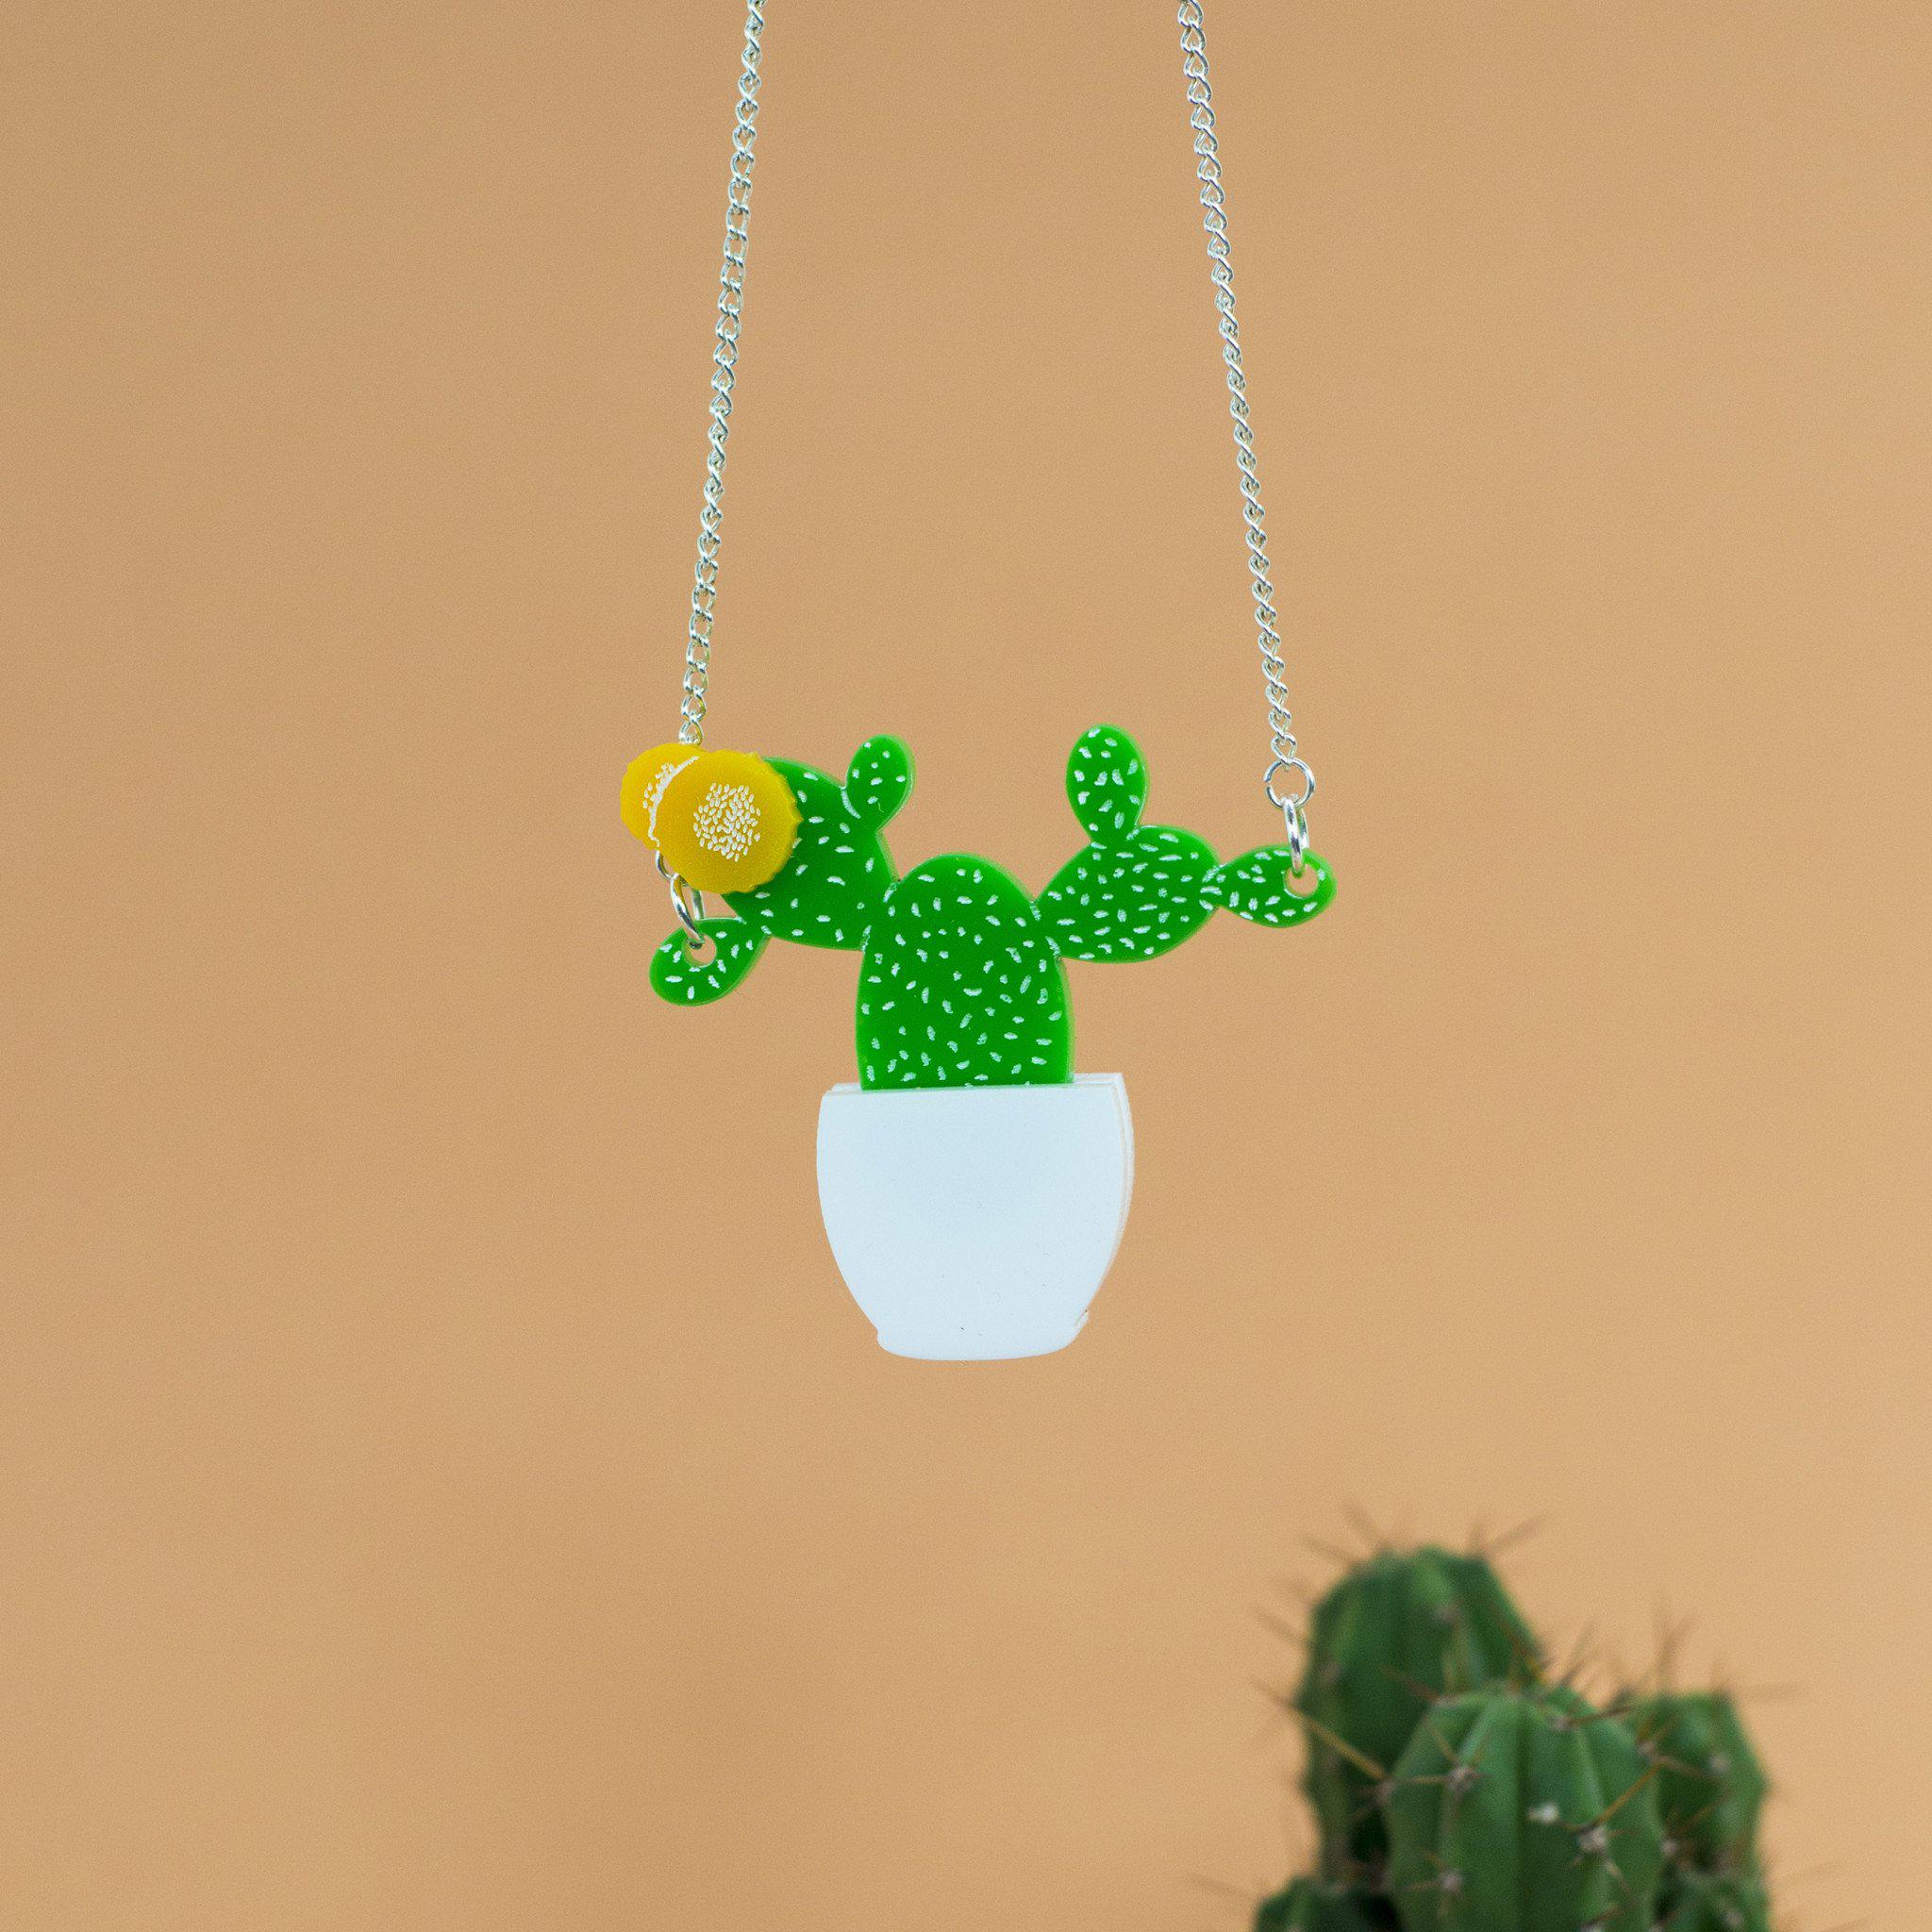 Prickly Pear Cactus Necklace - Finest Imaginary